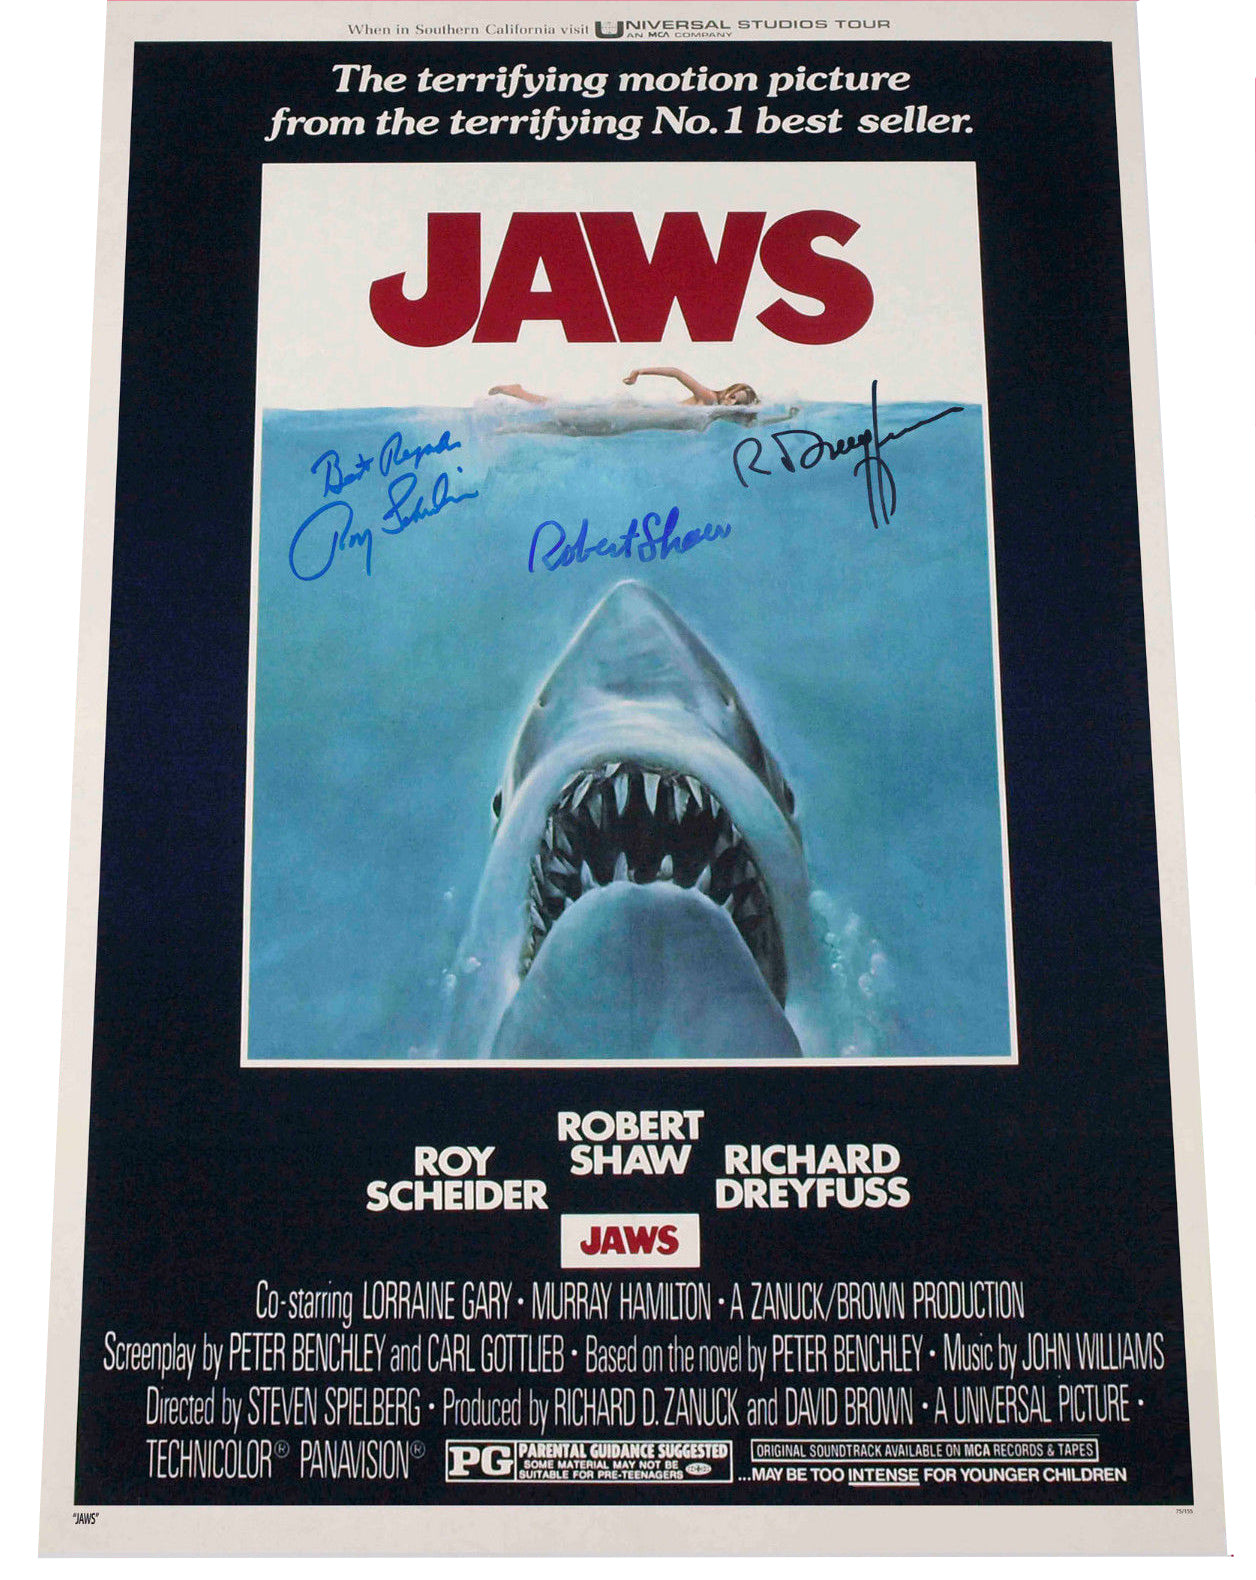 JAWS 3 CAST SIGNED AUTOGRAPH MOVIE POSTER A2 594 x 420mm (Very Rare)